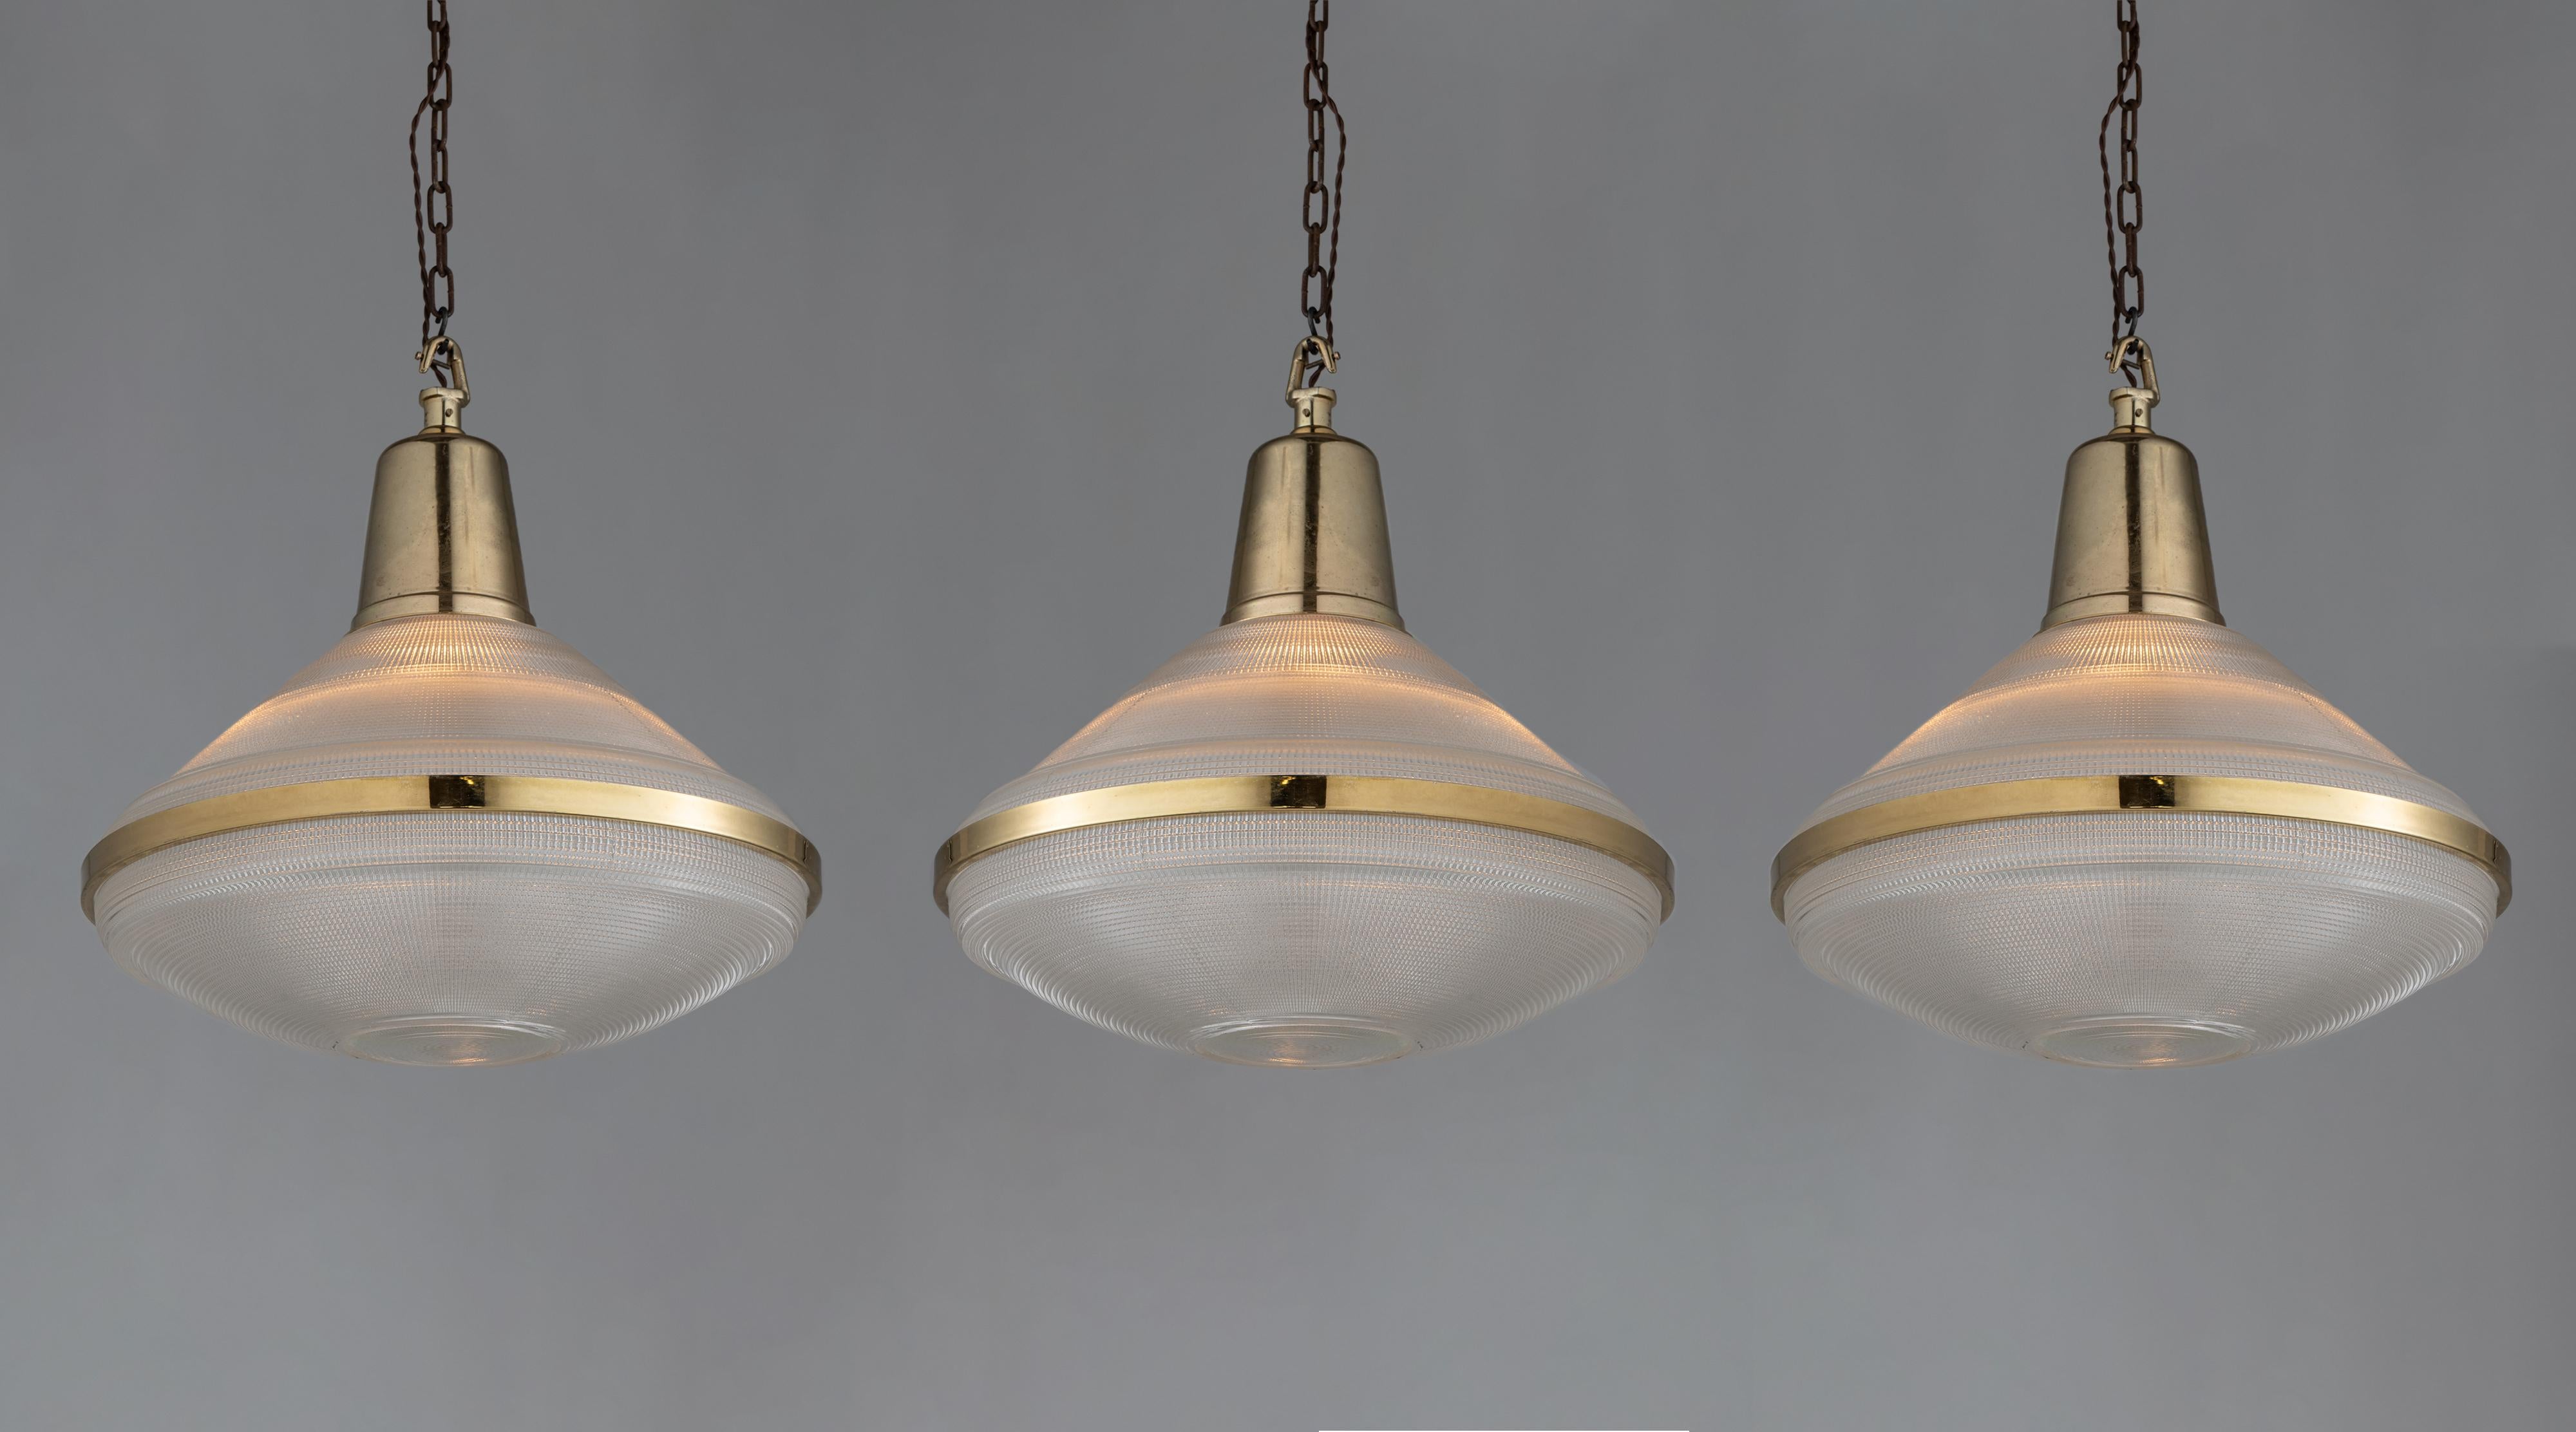 Extra large prismatic deco lights, England circa 1920.

Three part prismatic glass pendant with original heavy brass fitter and surround.

Measures: 22” diameter x 22.25” height.

*Please note the price is per unit, and the lights are sold